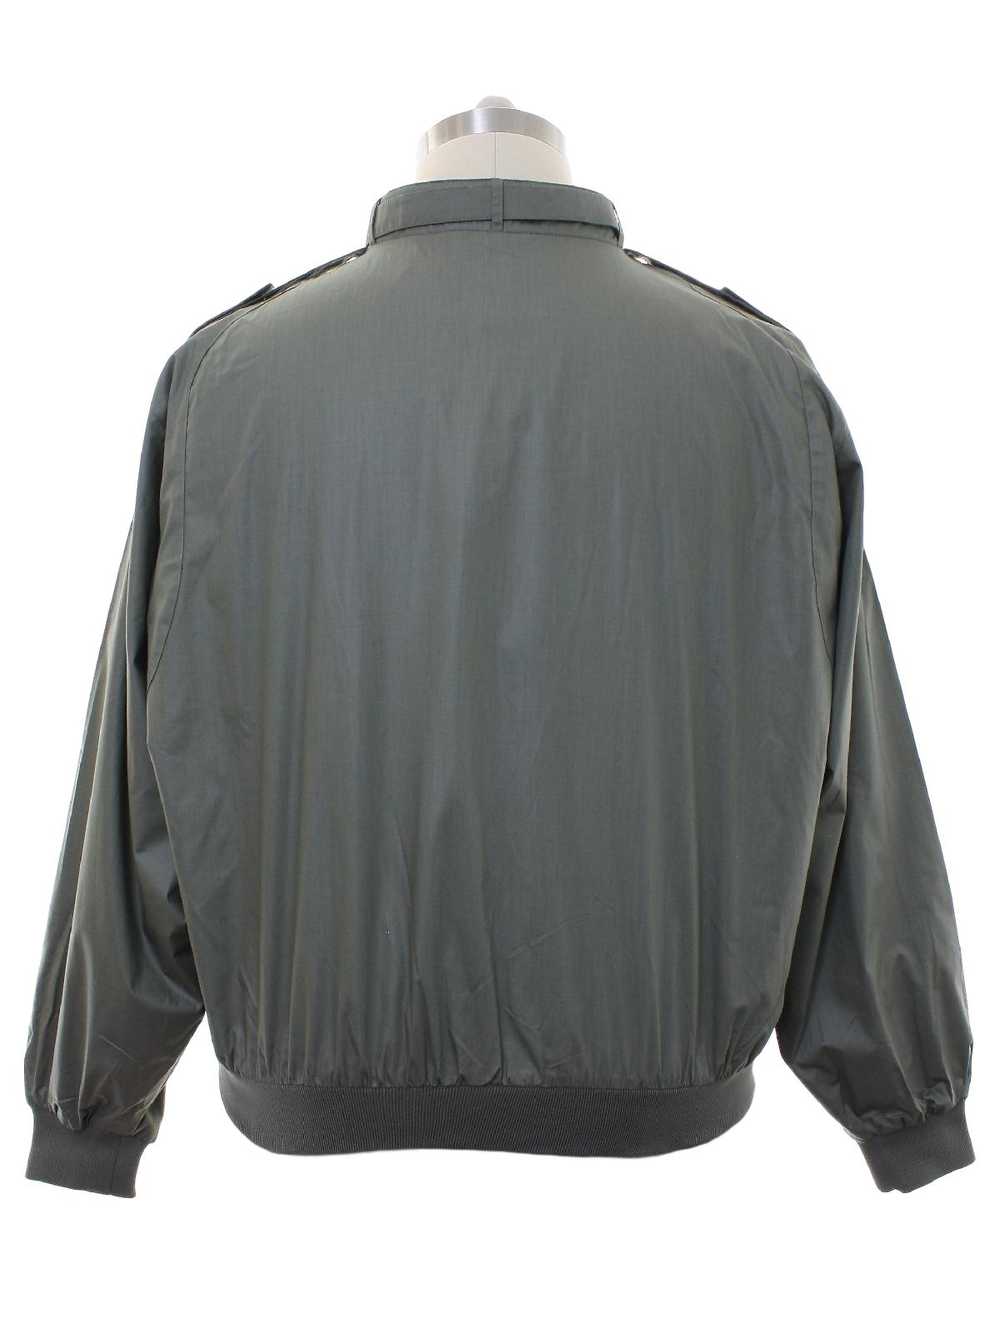 1980's Members Only Mens Members Only Jacket - image 3